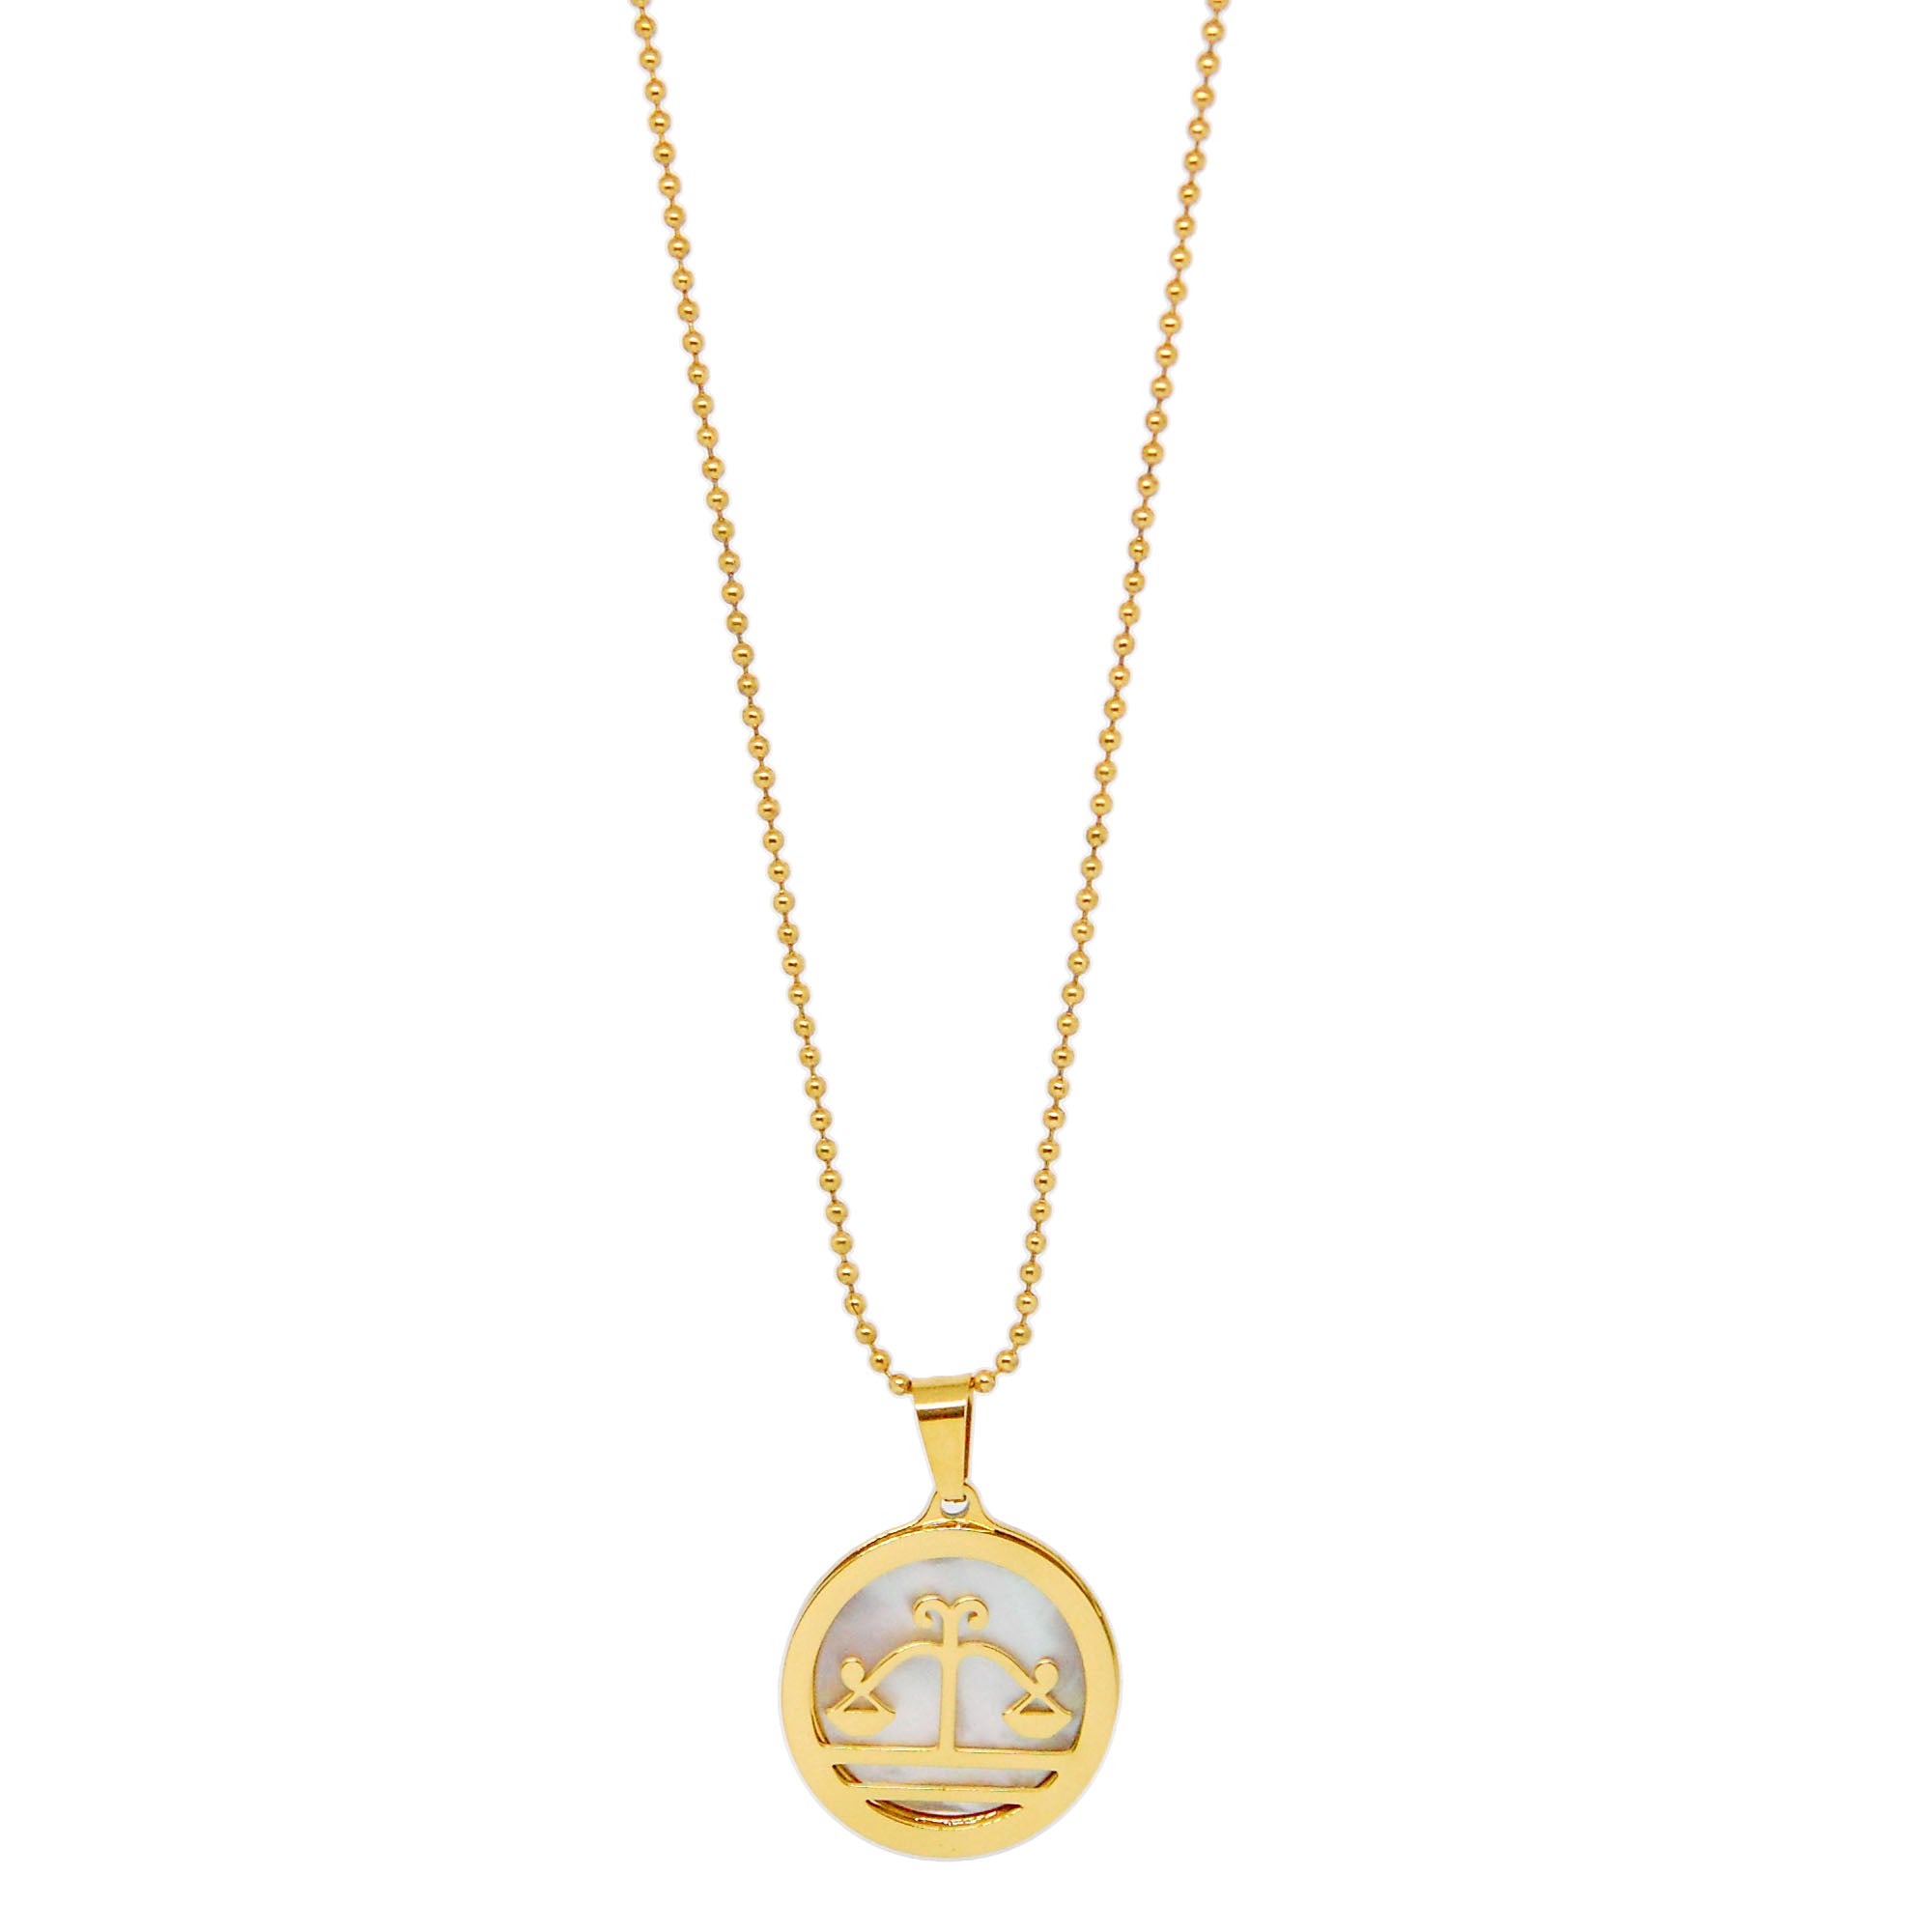 ESN 7973: All IPG Mop Libra Zodiac Necklace w/ 18" IPG Ball Chain